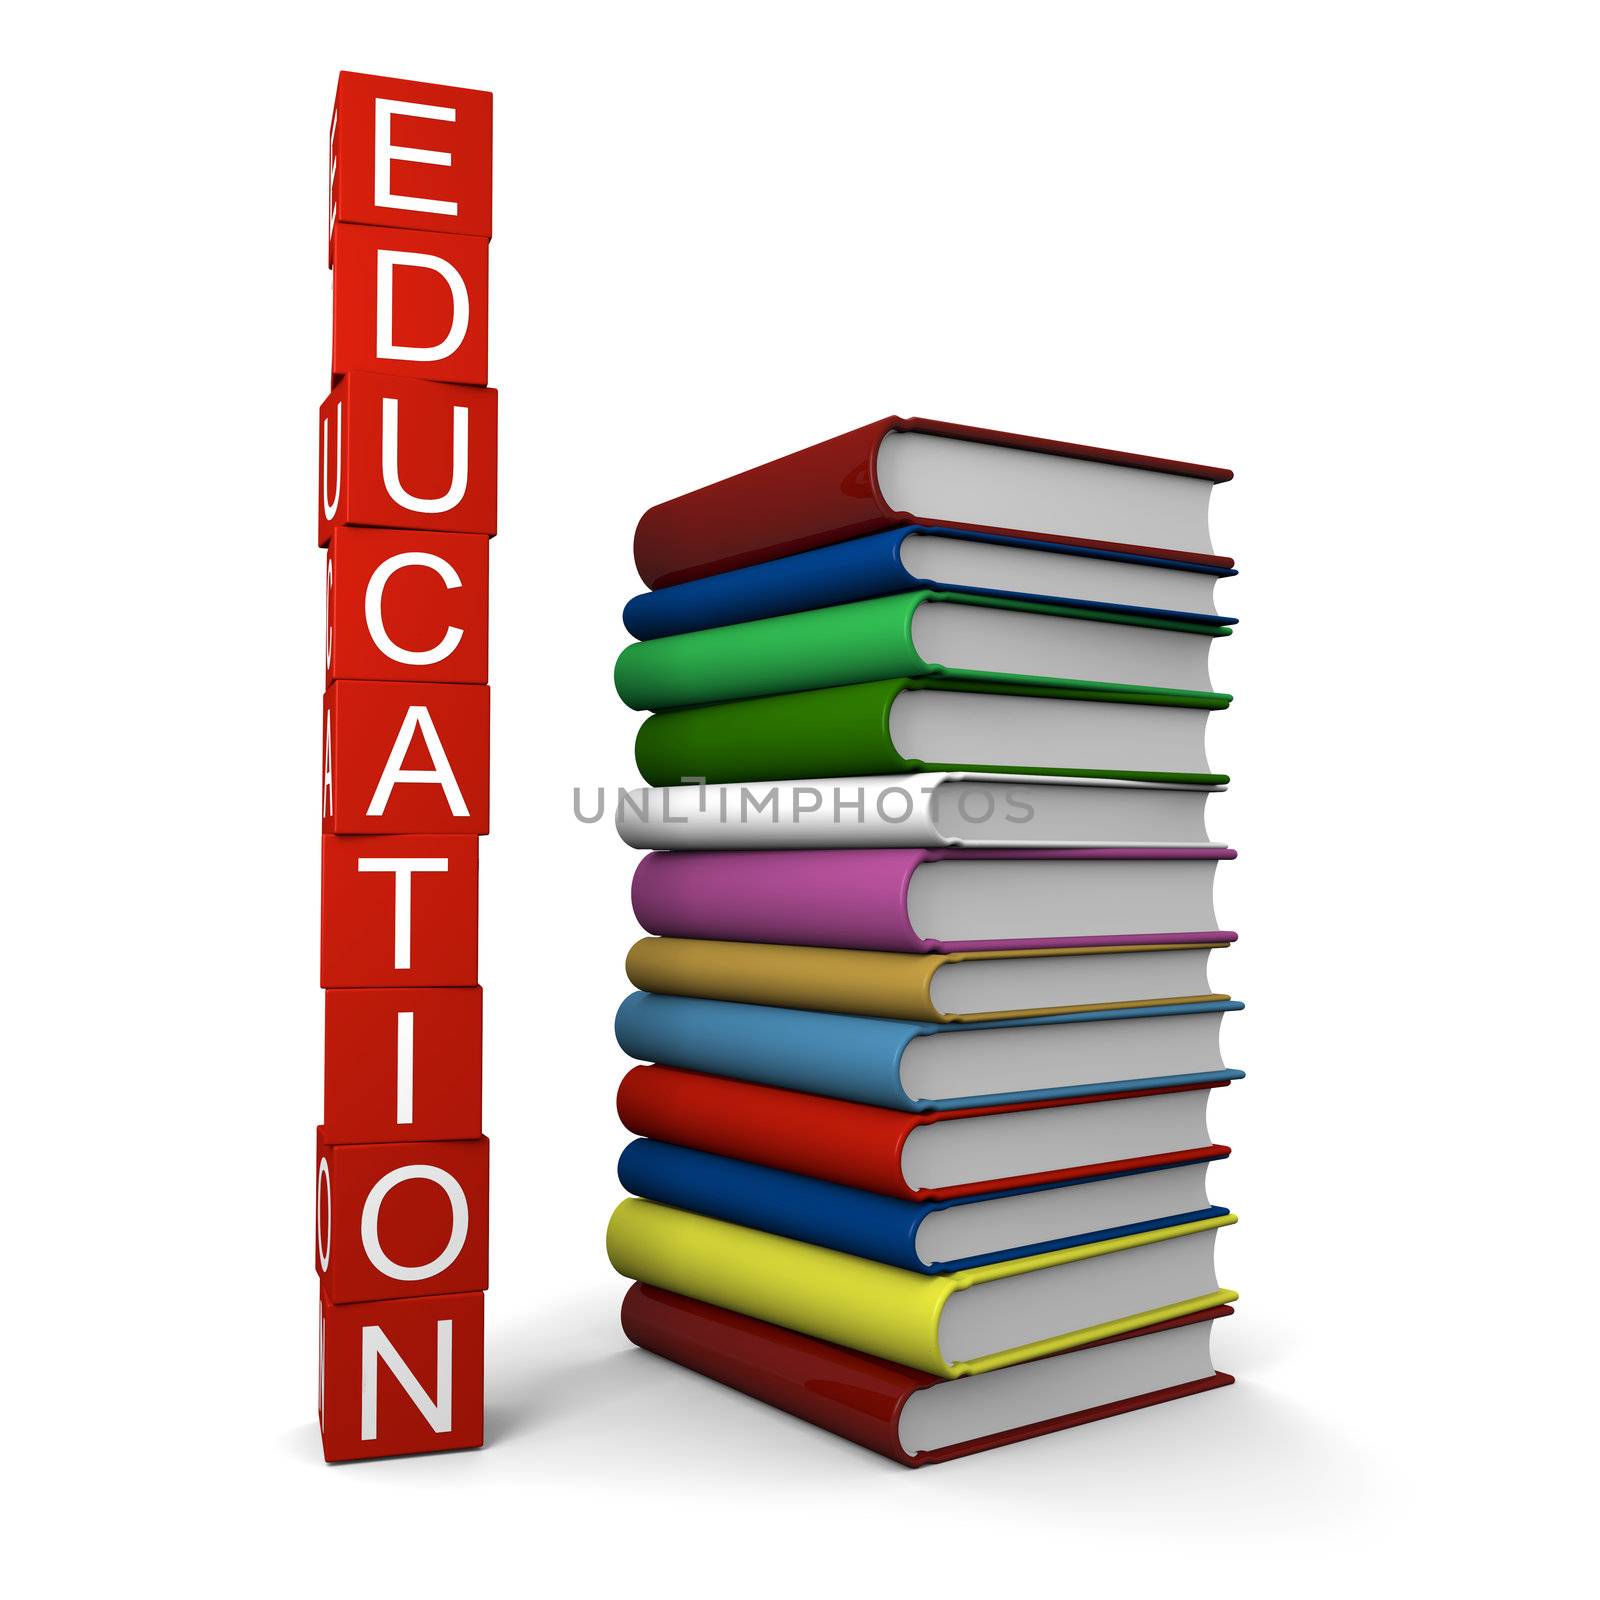 Concept of education with pile of colorful books and education sign made of red blocks